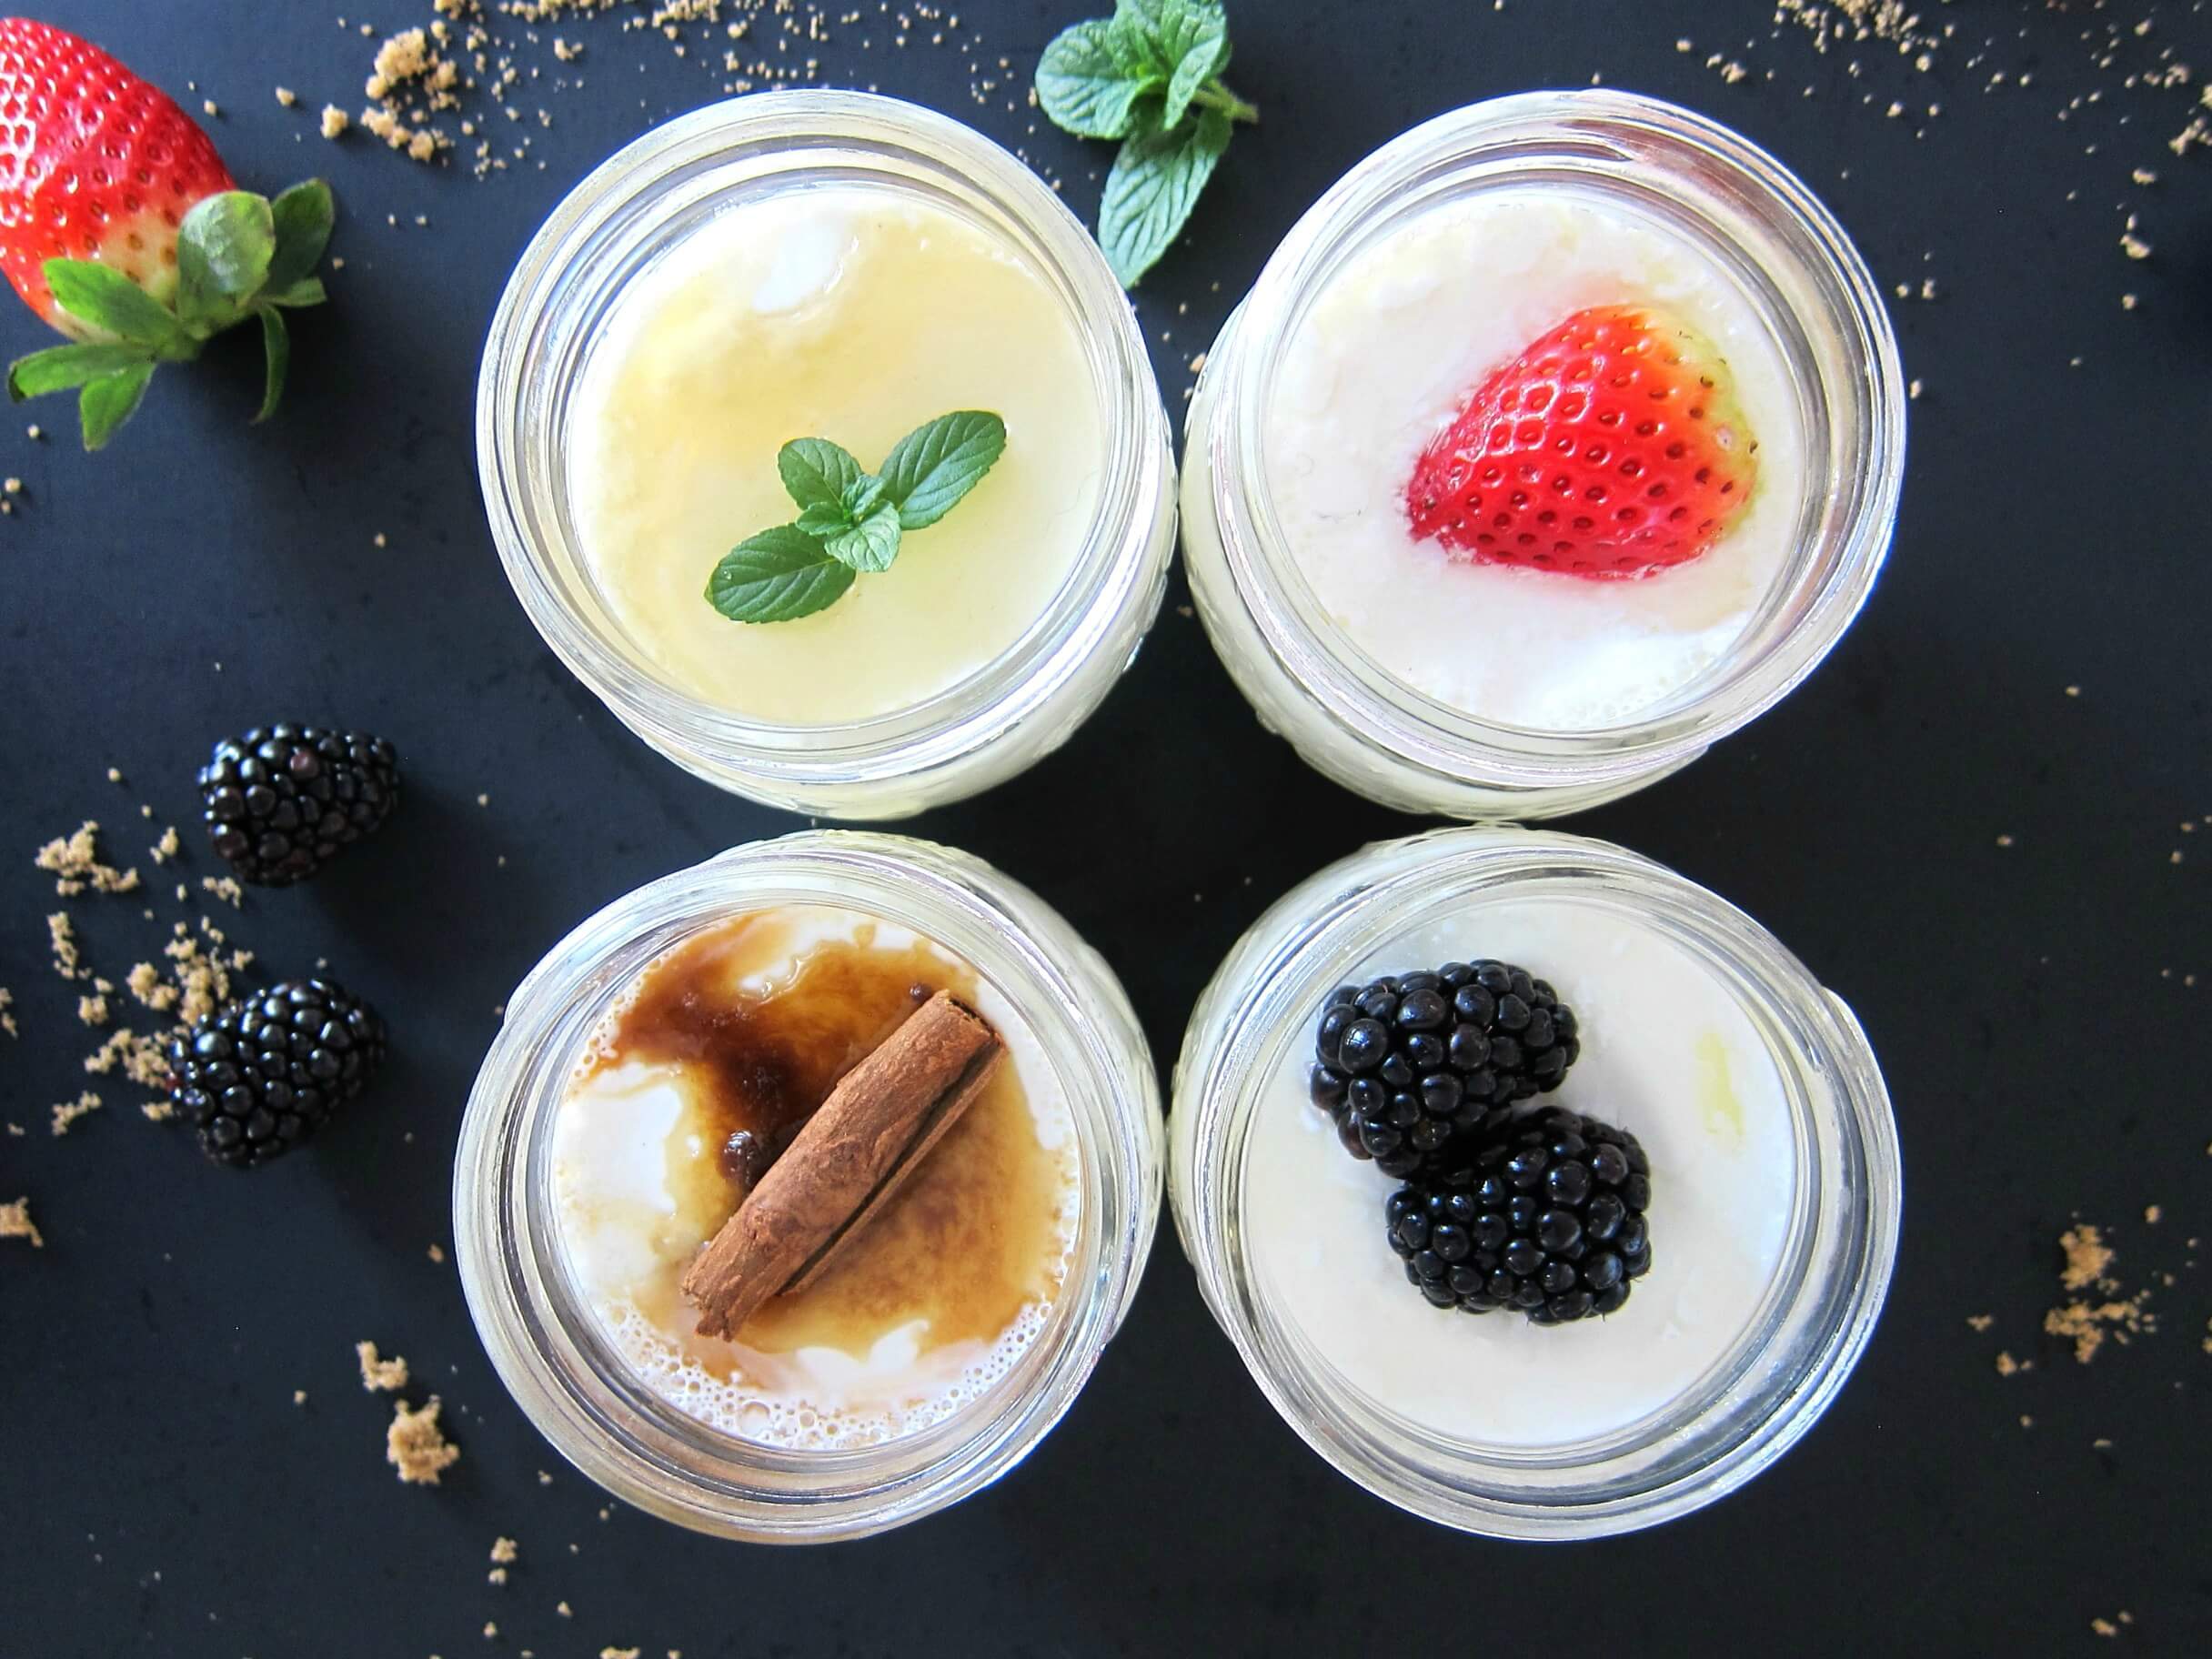 How to Make Instant Pot Yogurt in Jars the Fast and Easy Way